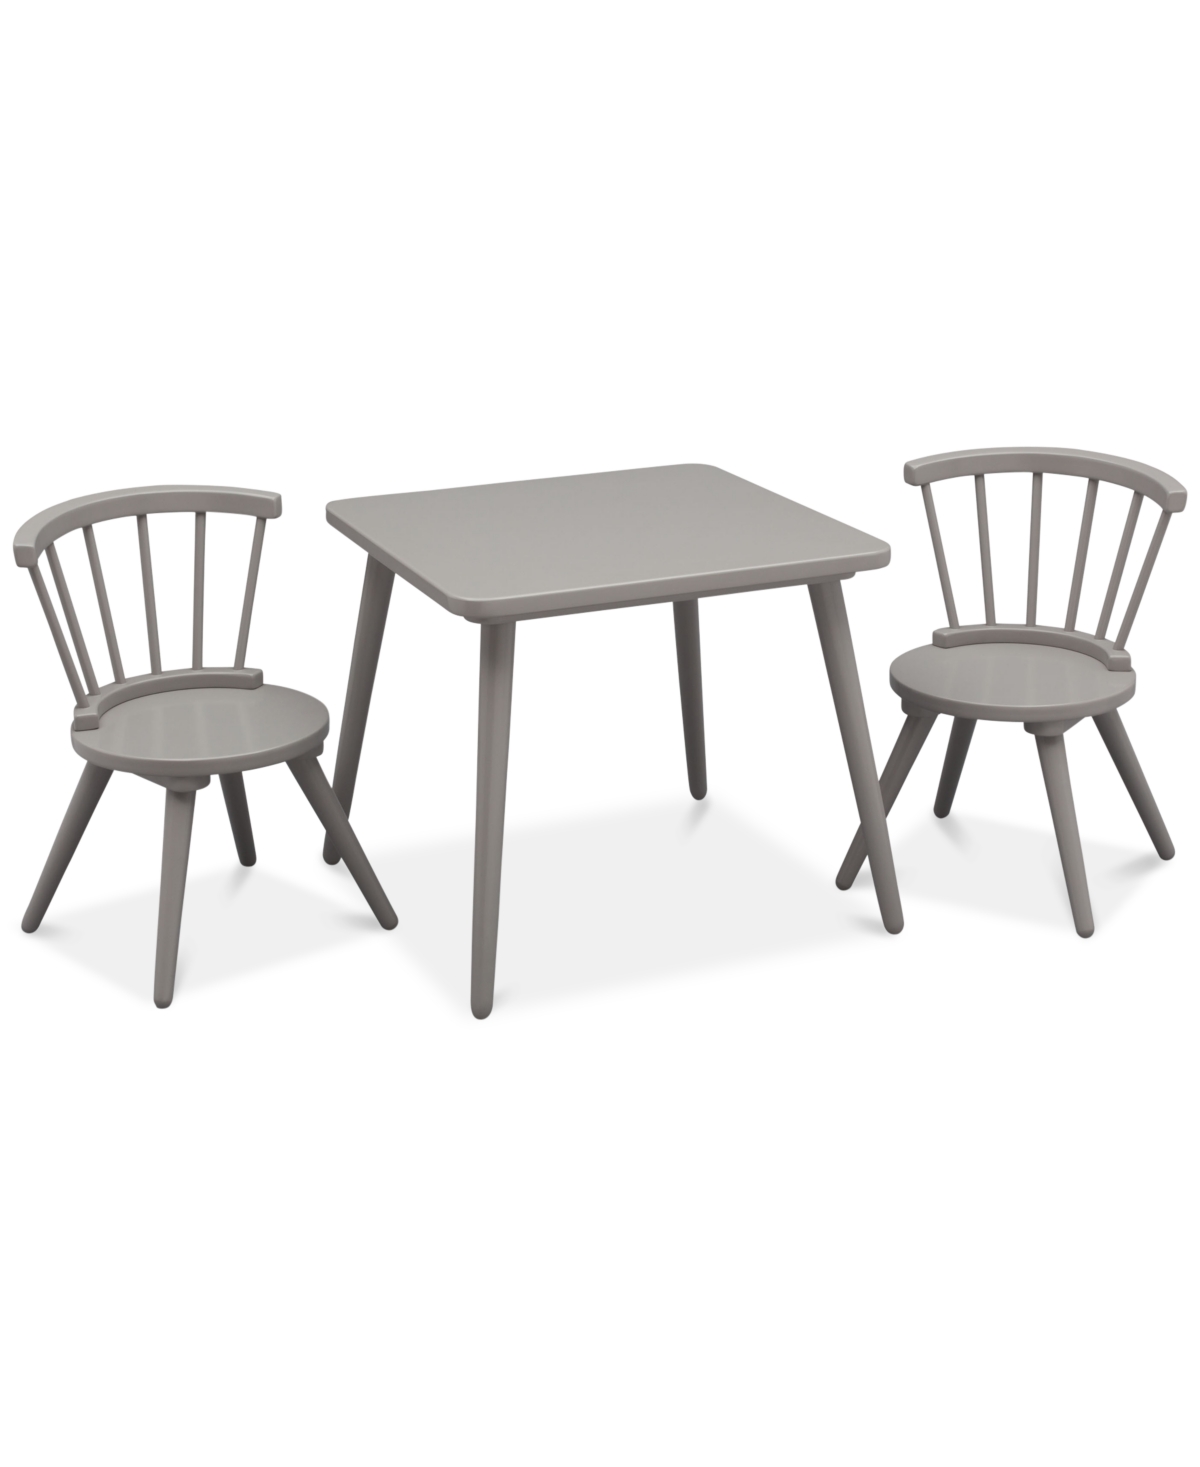 Delta Children Windsor Table and 2 Chair Set